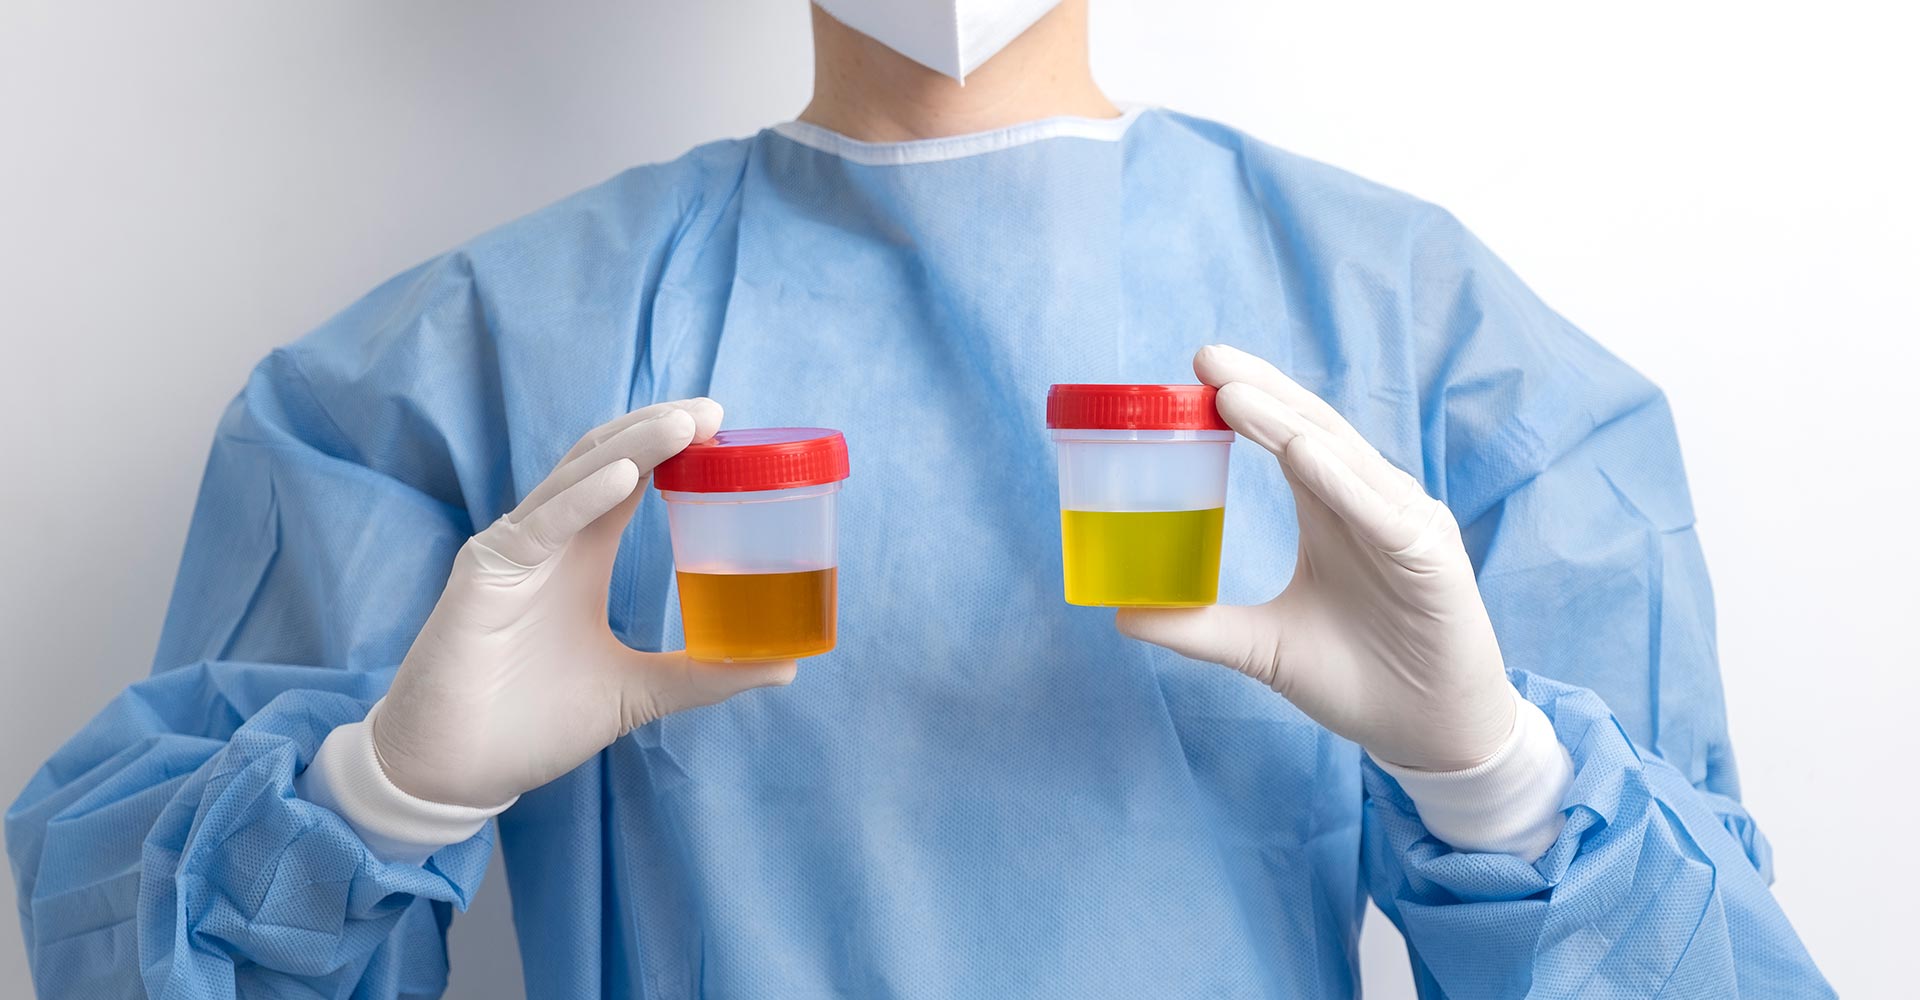 Uncomplicated Urinary Tract Infections (uUTI)